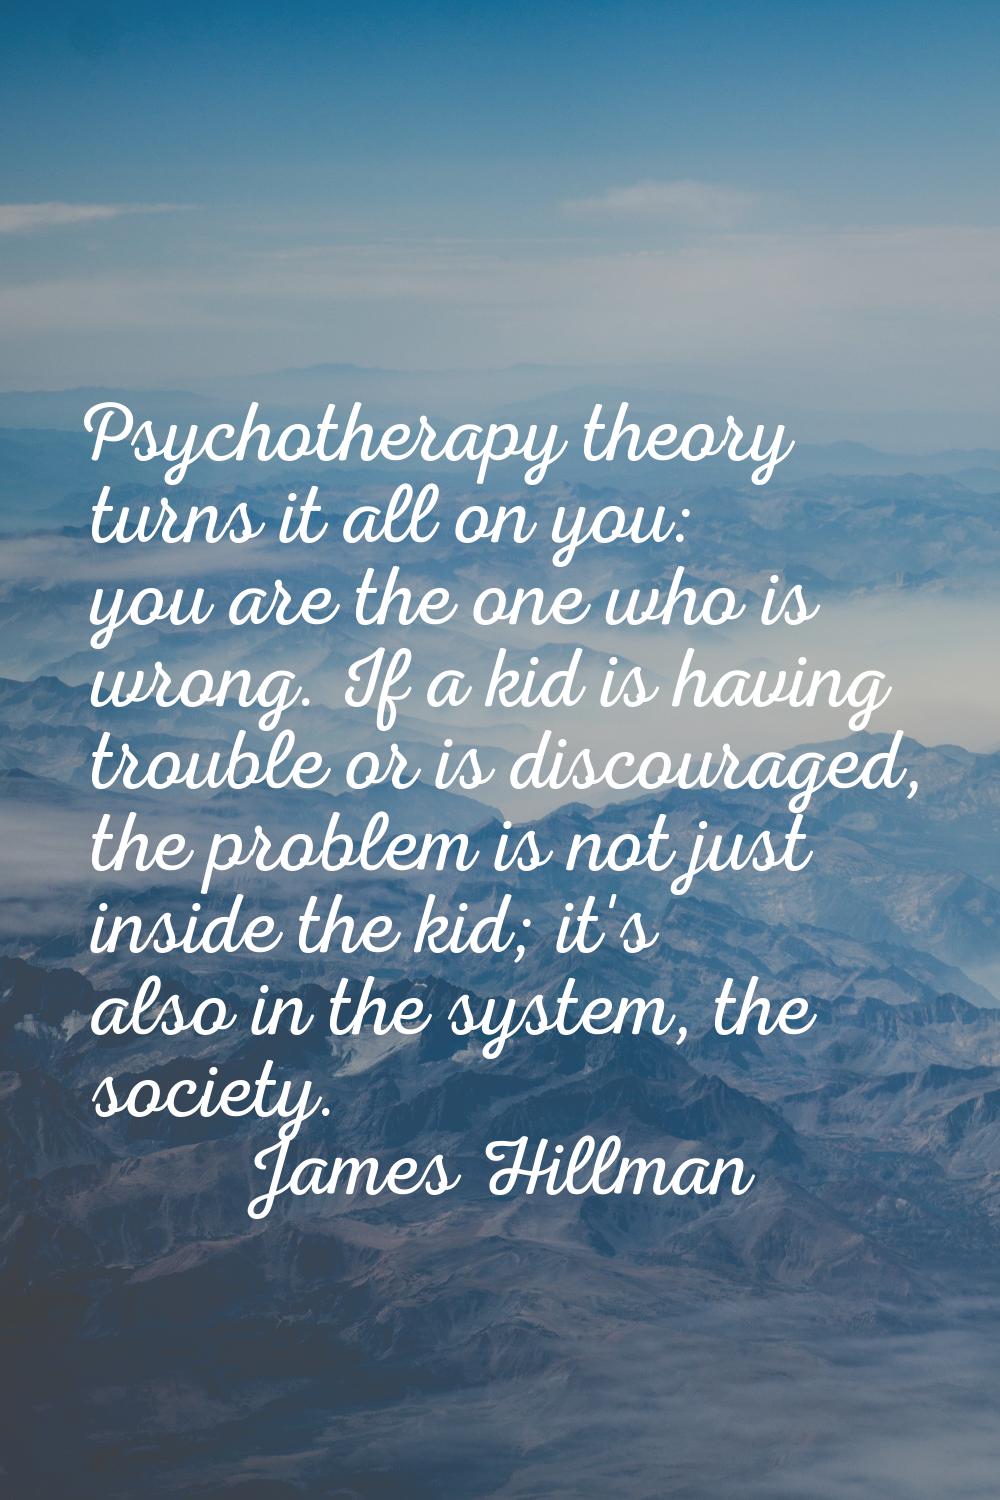 Psychotherapy theory turns it all on you: you are the one who is wrong. If a kid is having trouble 